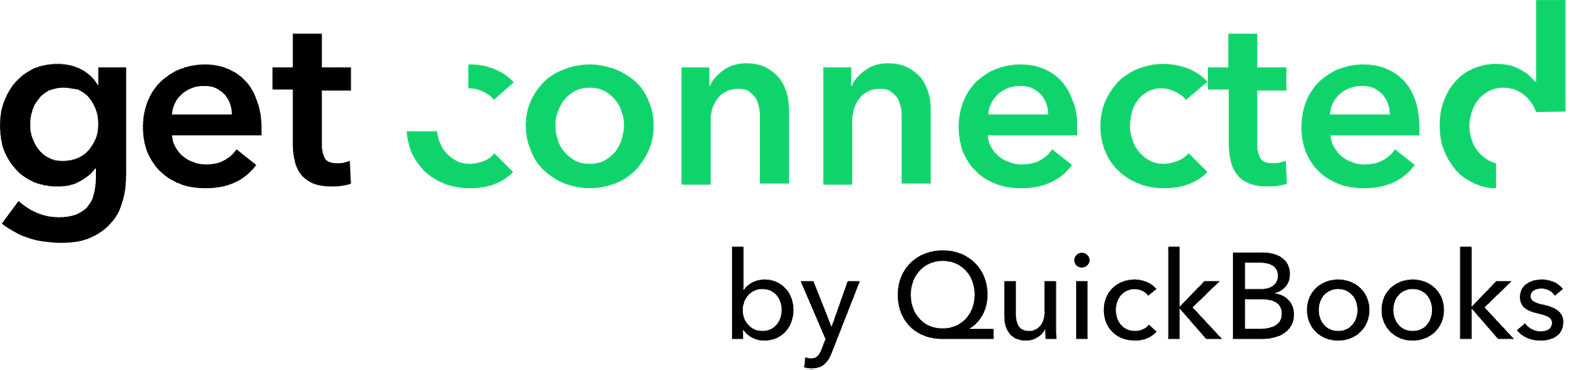 Get Connected by Quickbooks logo